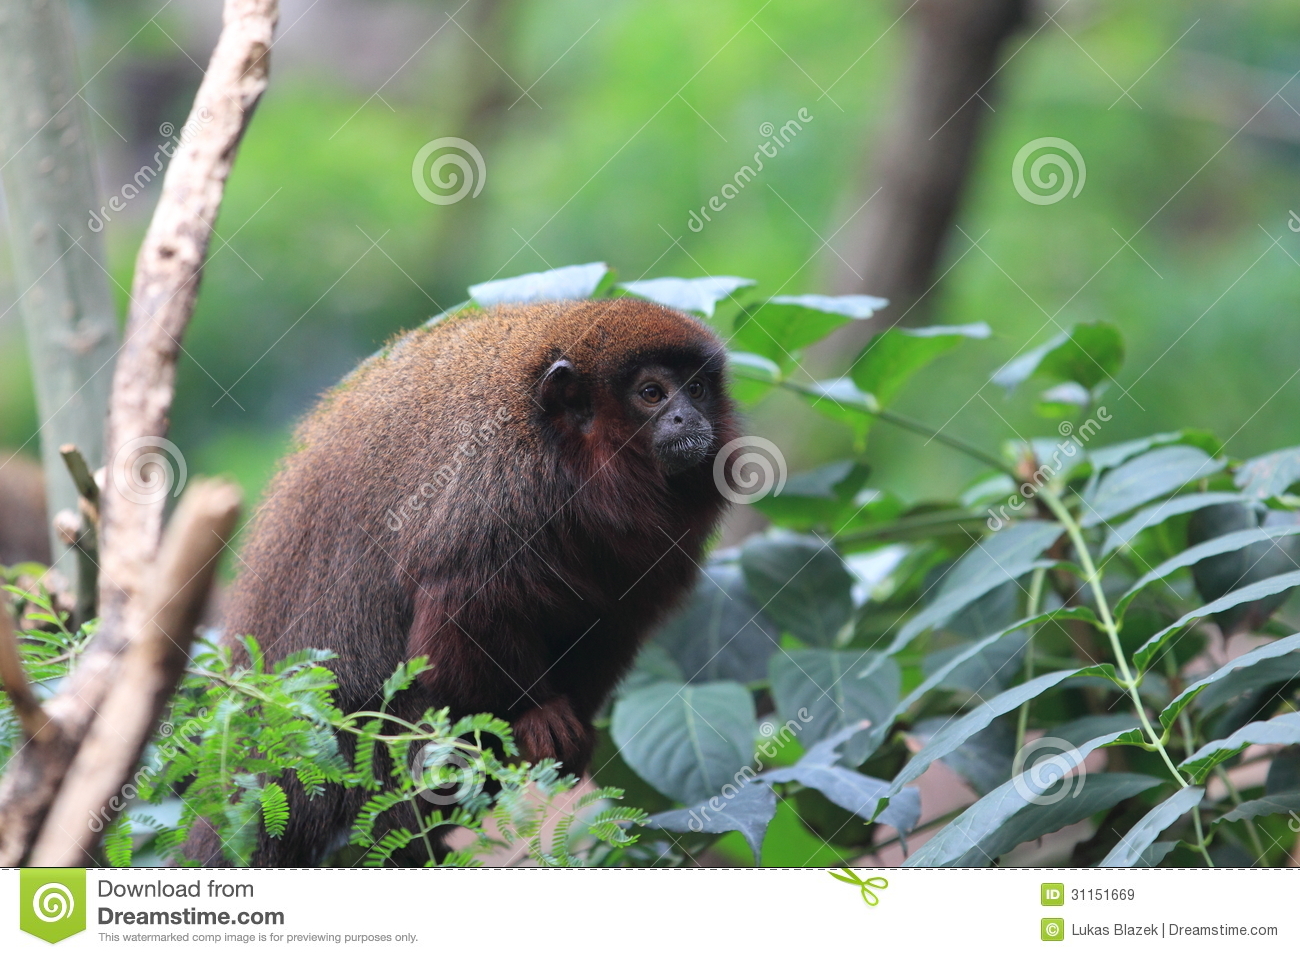 how do titi monkeys from south america practice tail twining in pairs up in the trees